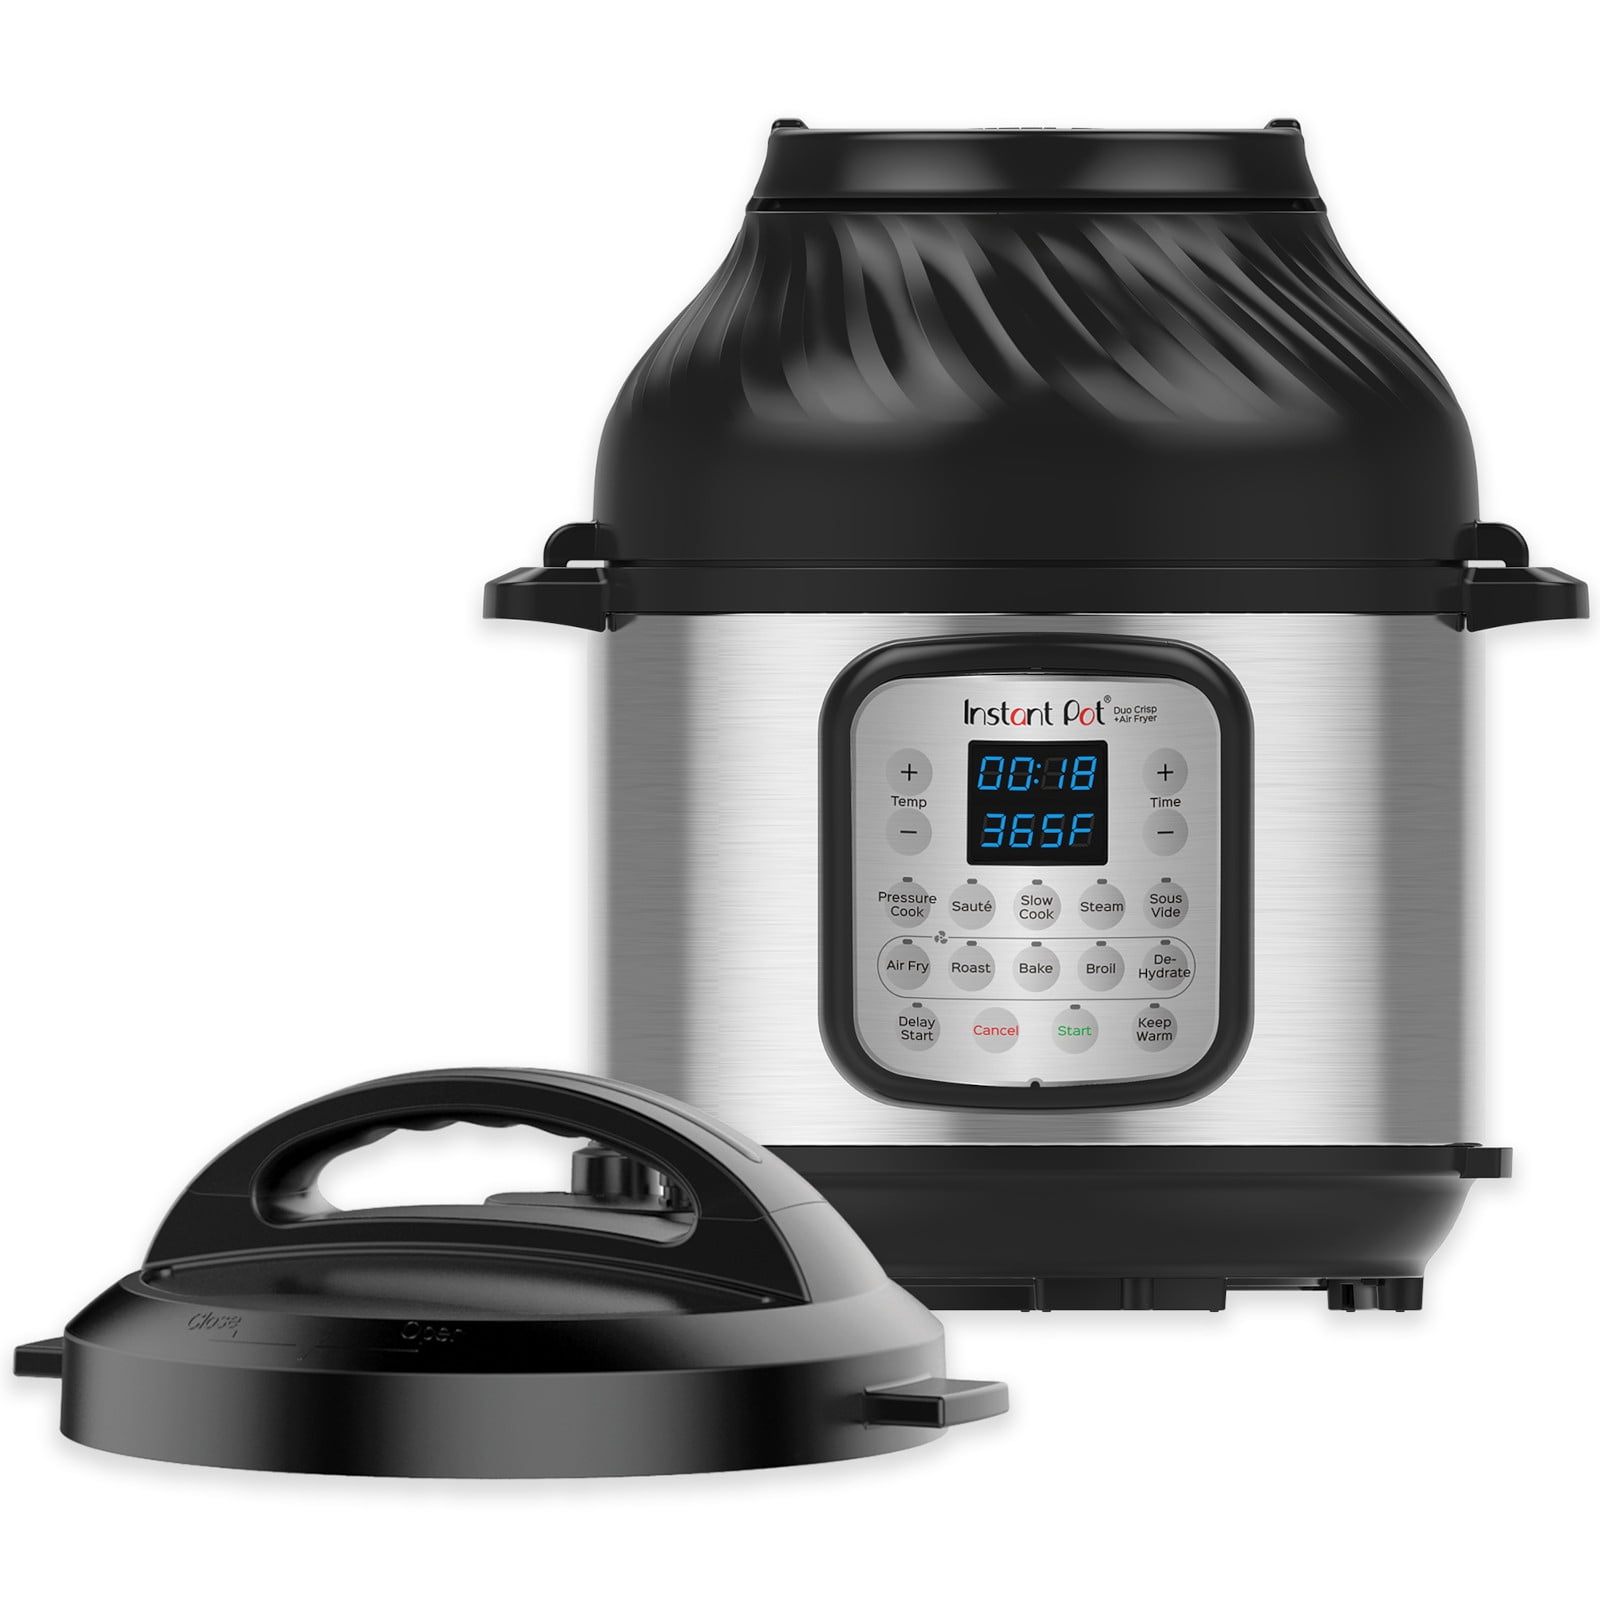 Instant Pot Duo Gourmet 9 in 1 Multi-Use Electric Pressure Cooker 5.7L